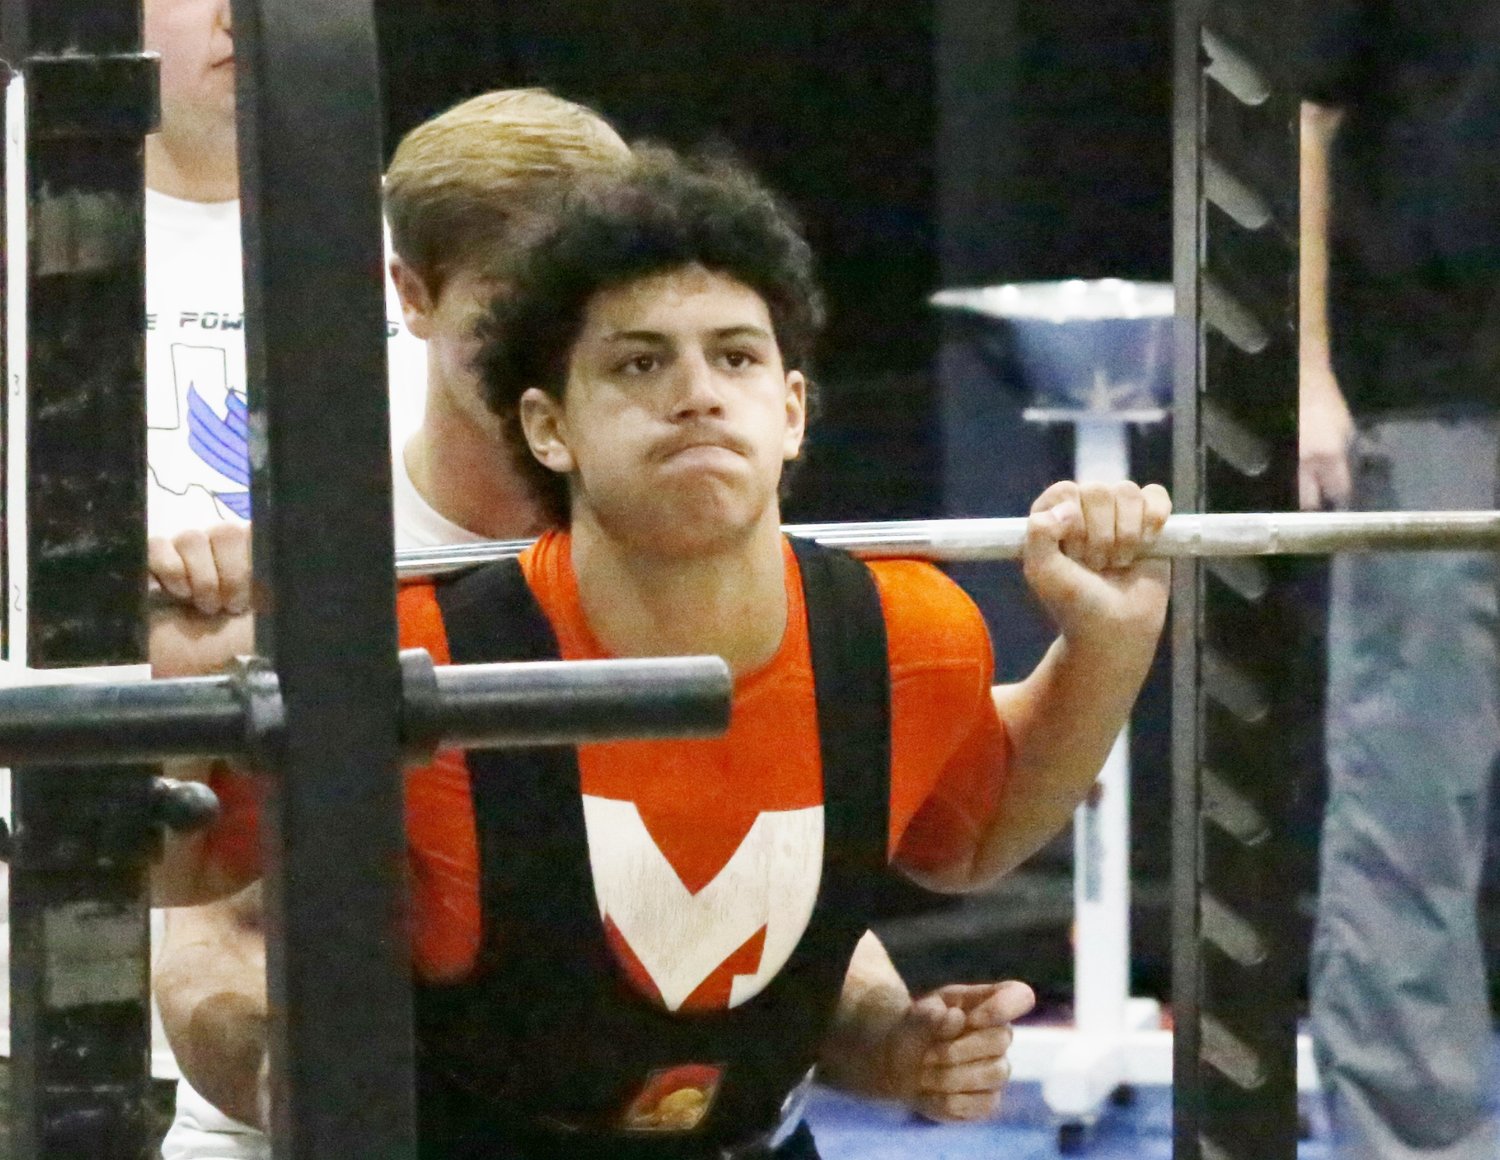 Kobe Kendrick is totally focused on the bar during a lift Saturday in Lindale. He finished sixth in the 198-pound class.